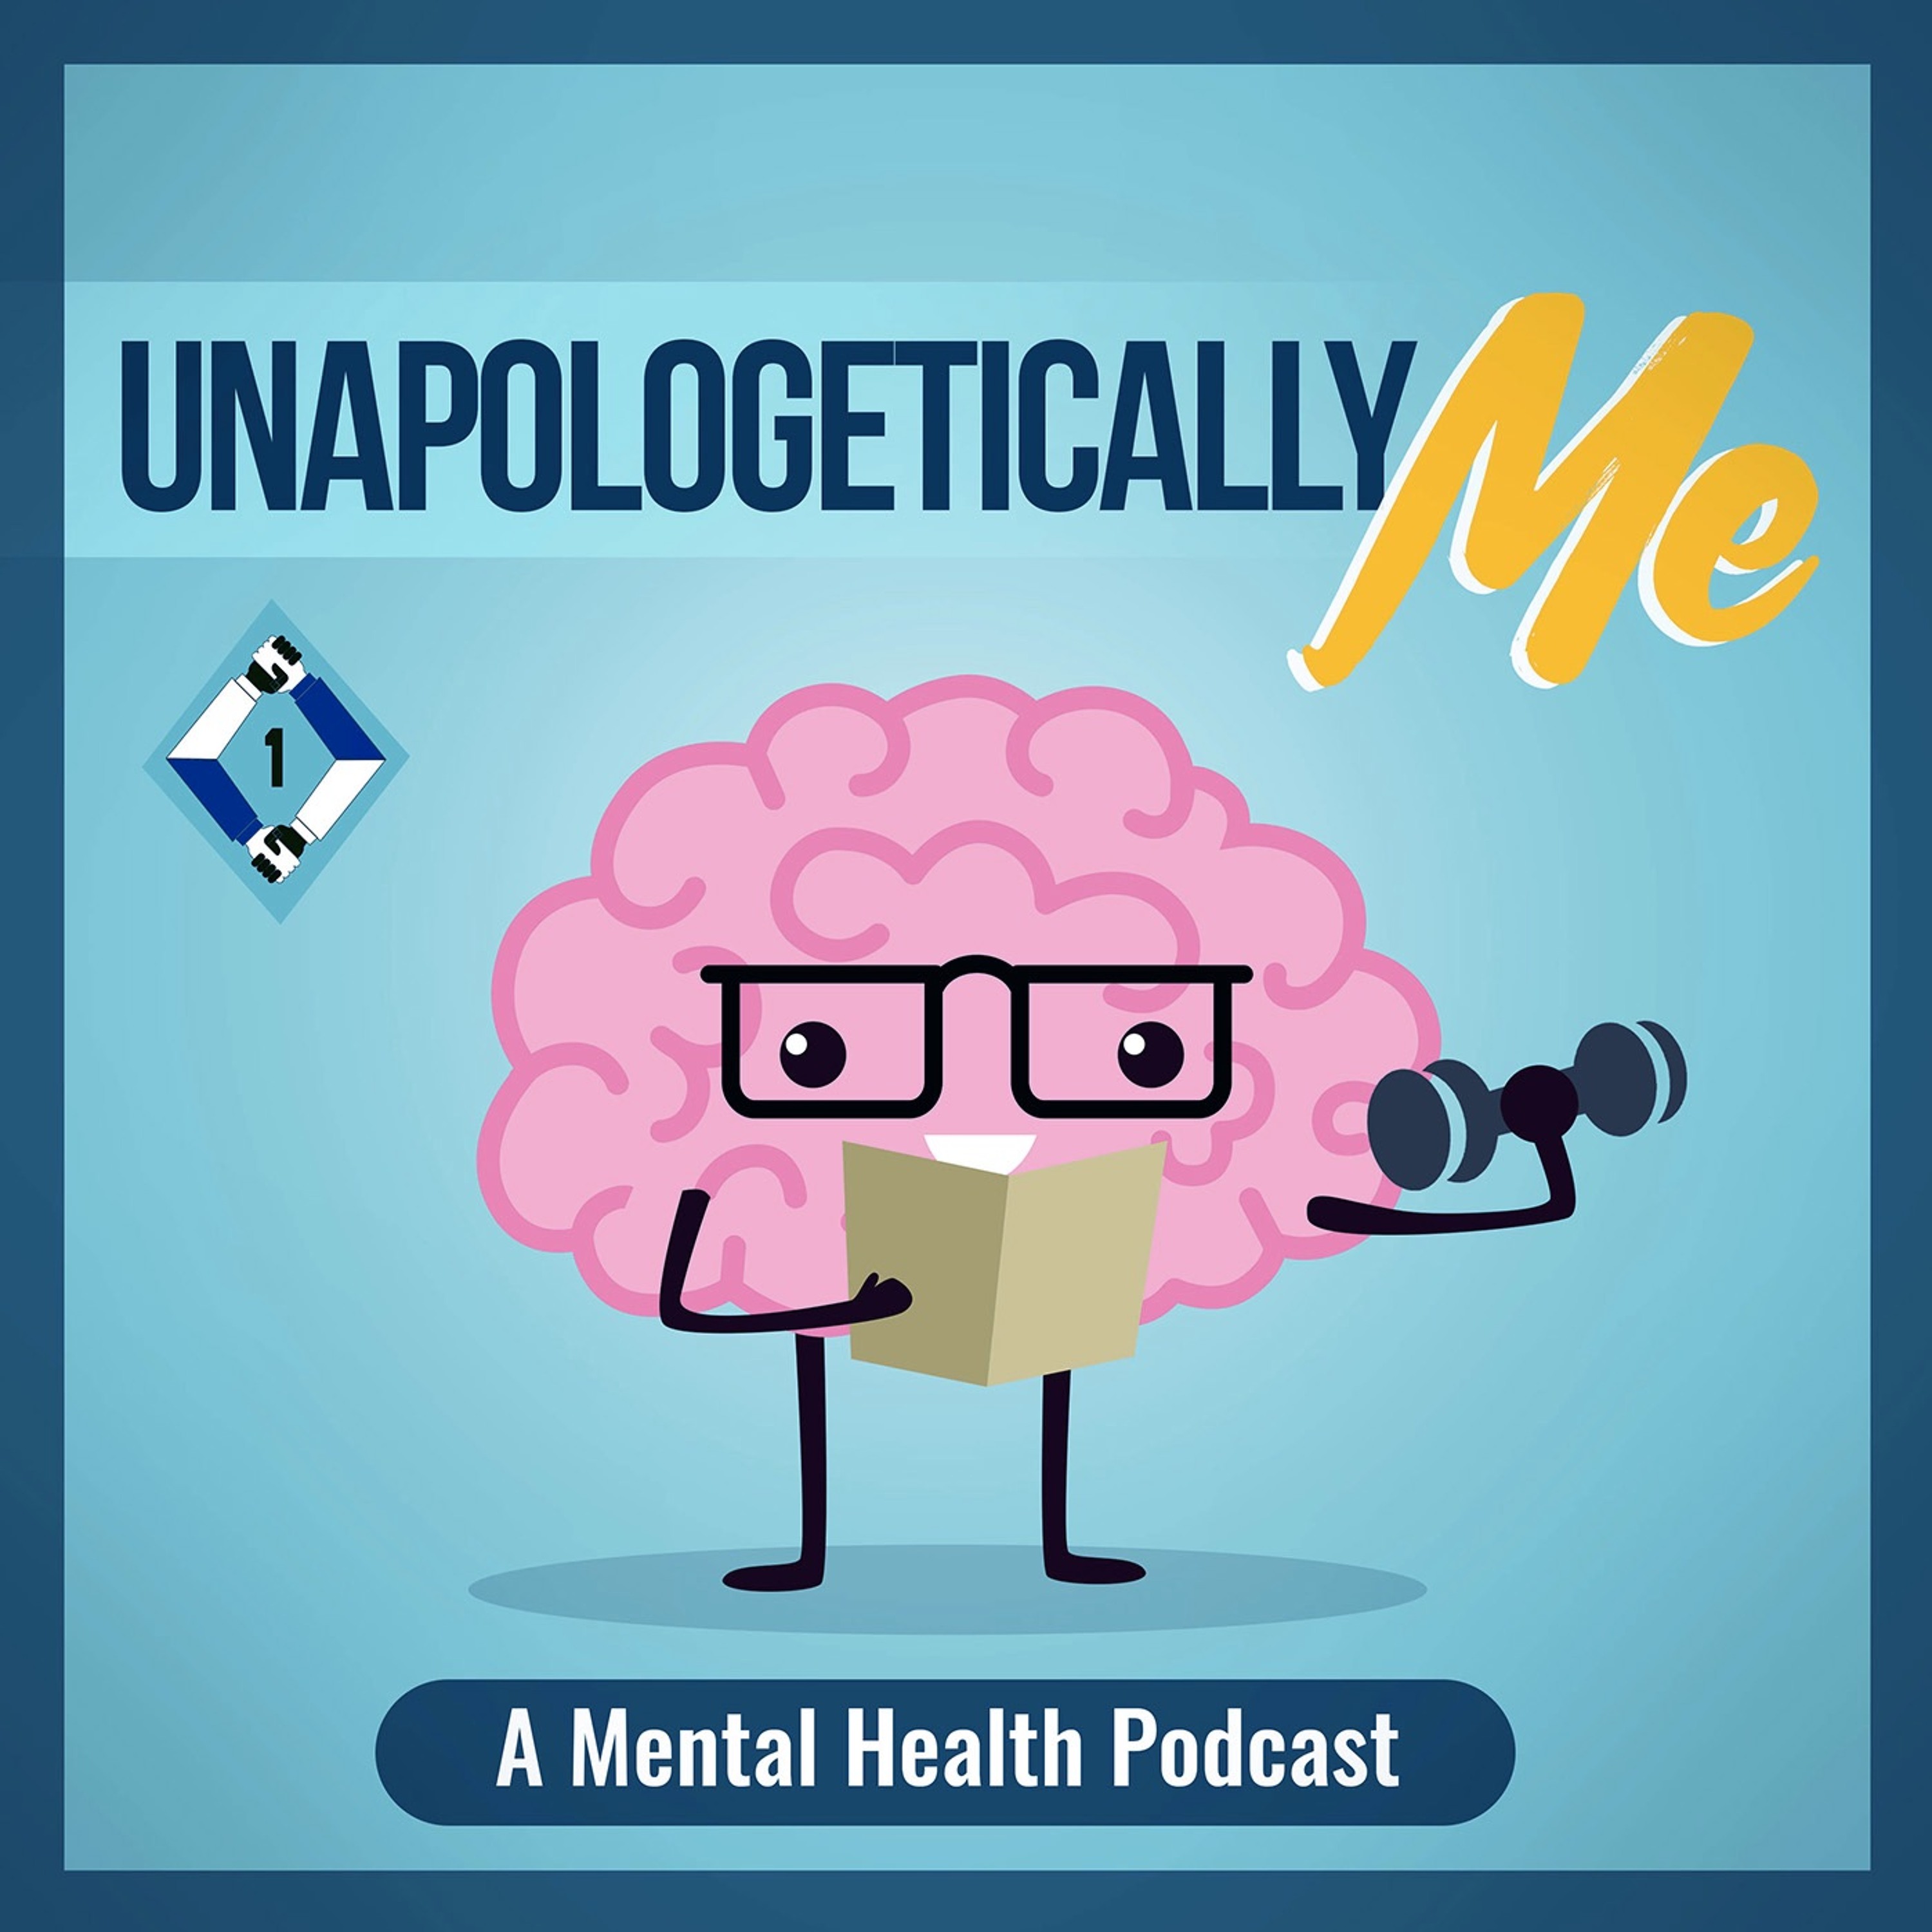 Unapologetically Me: A Mental Health Podcast - Adopting A Child